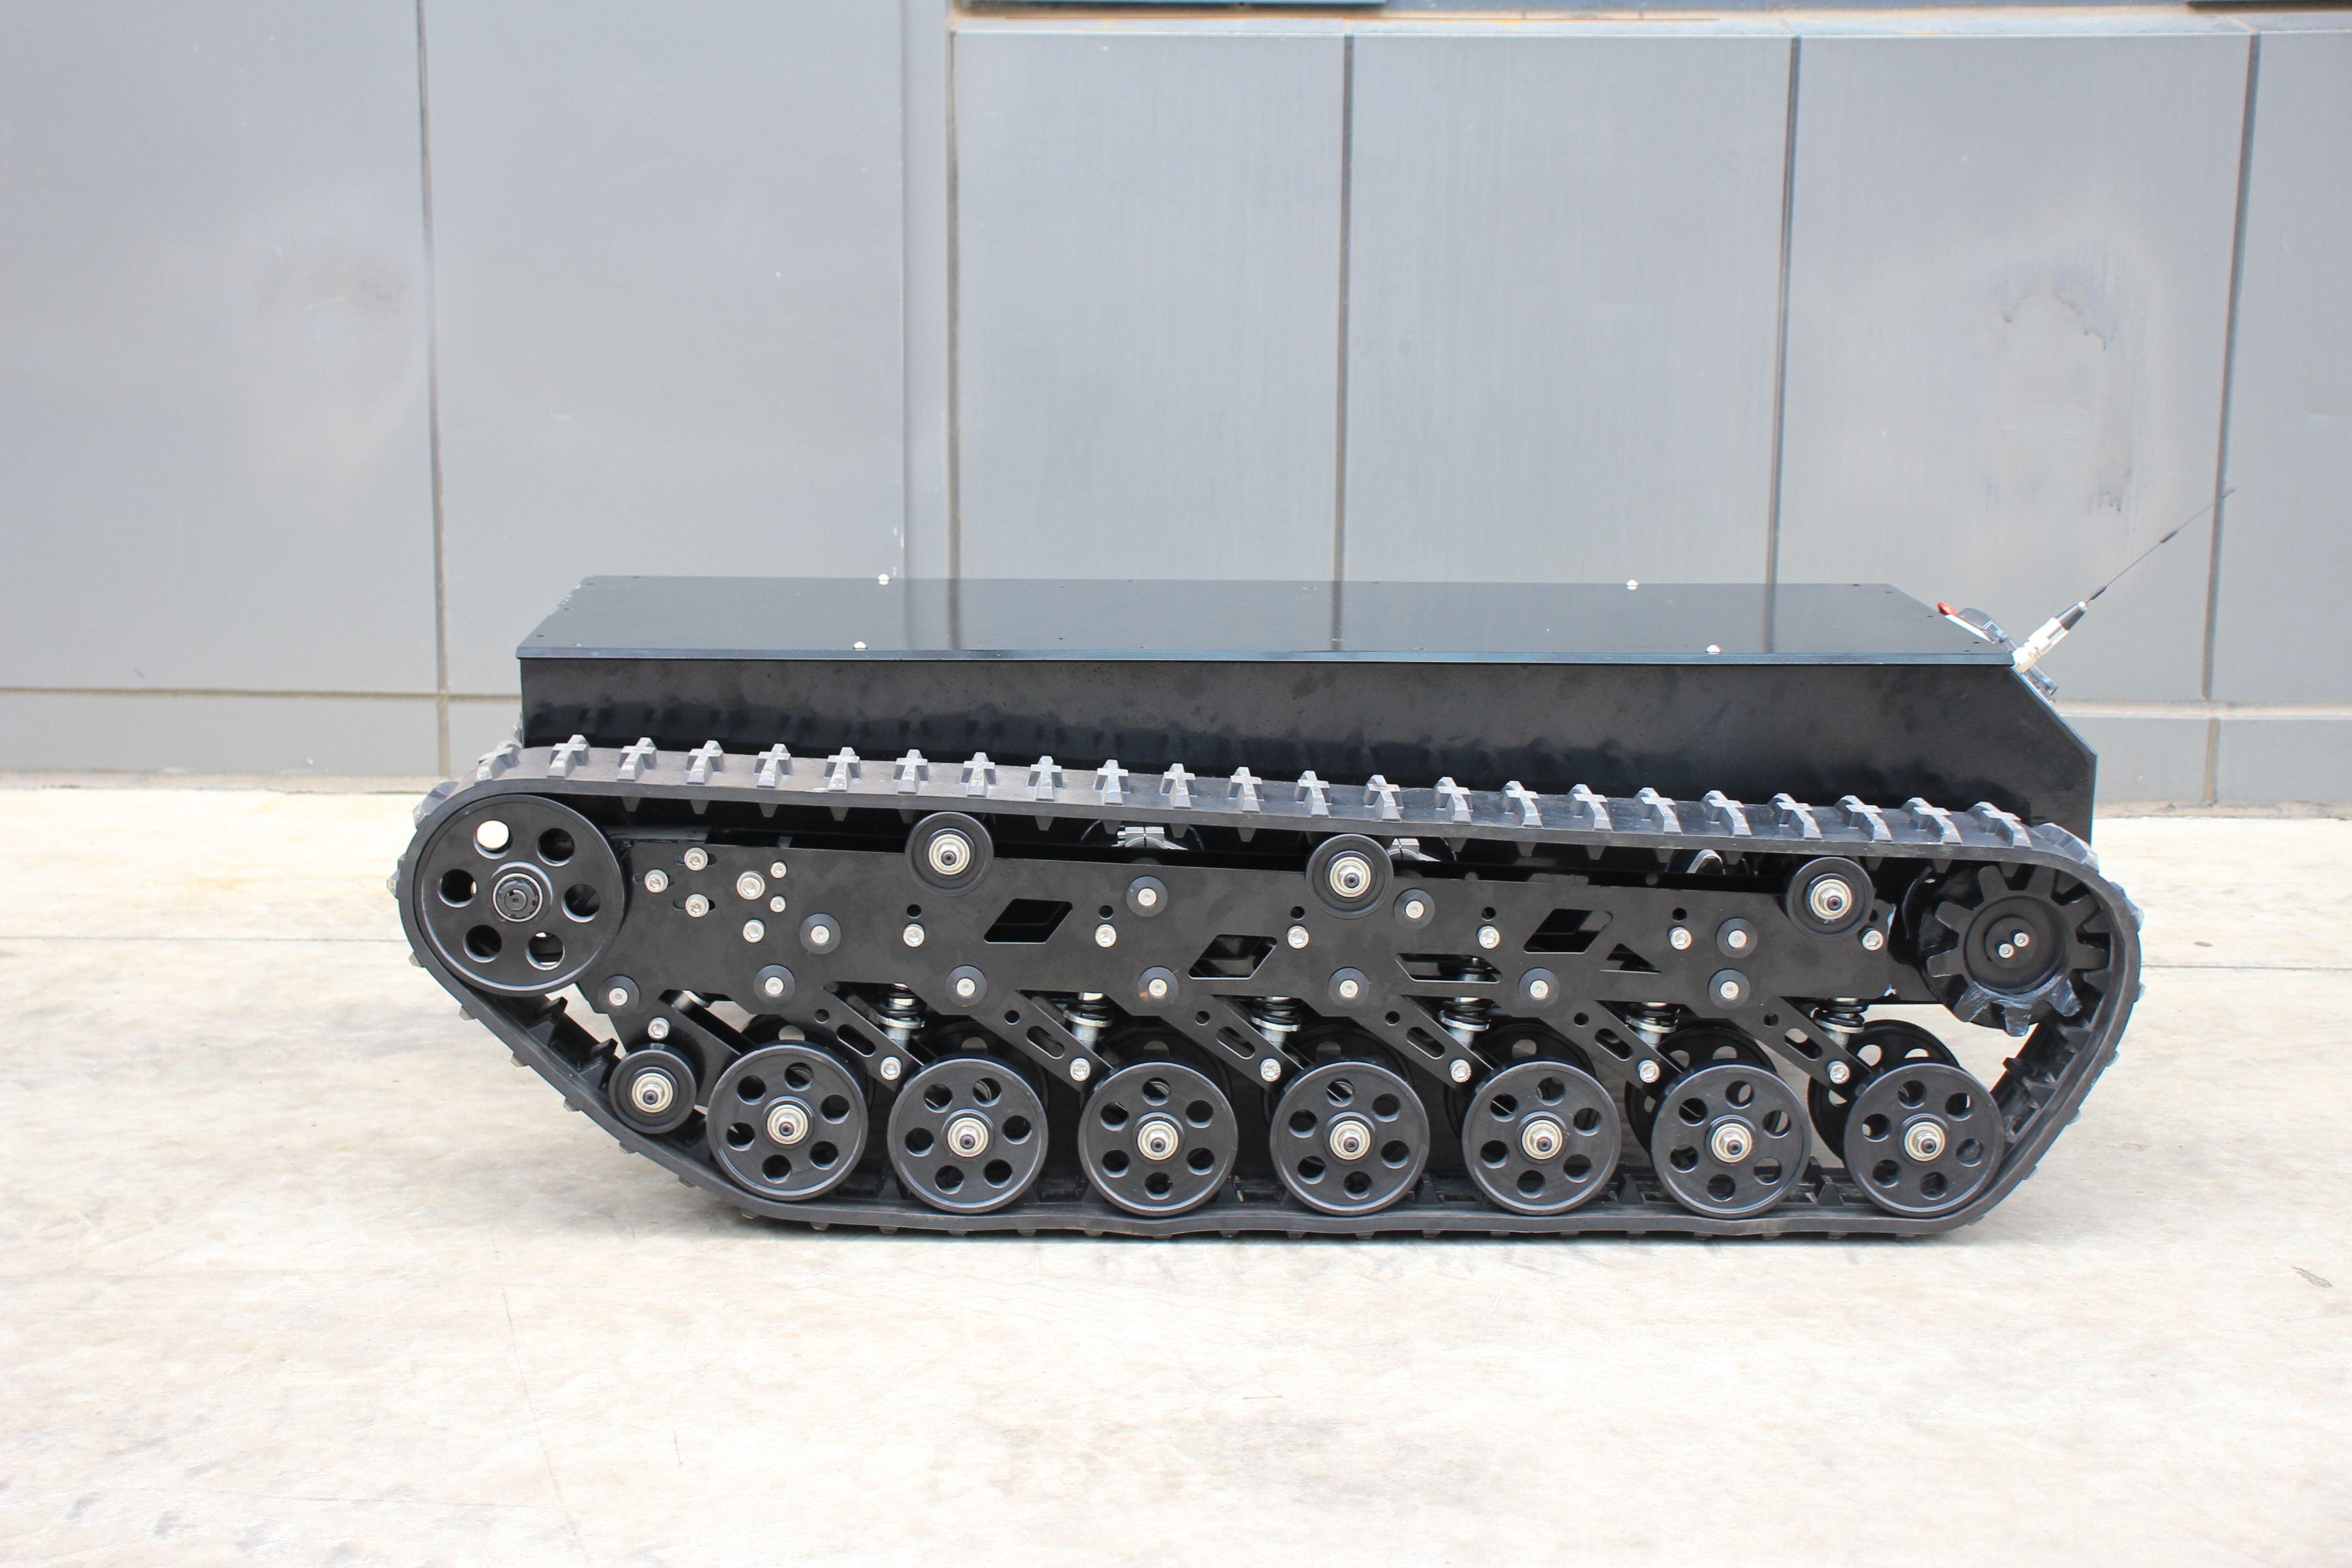 GuoXing 900T Enhanced Remote Control All Terrain Tracked Robot Tank Chassis Vehicles